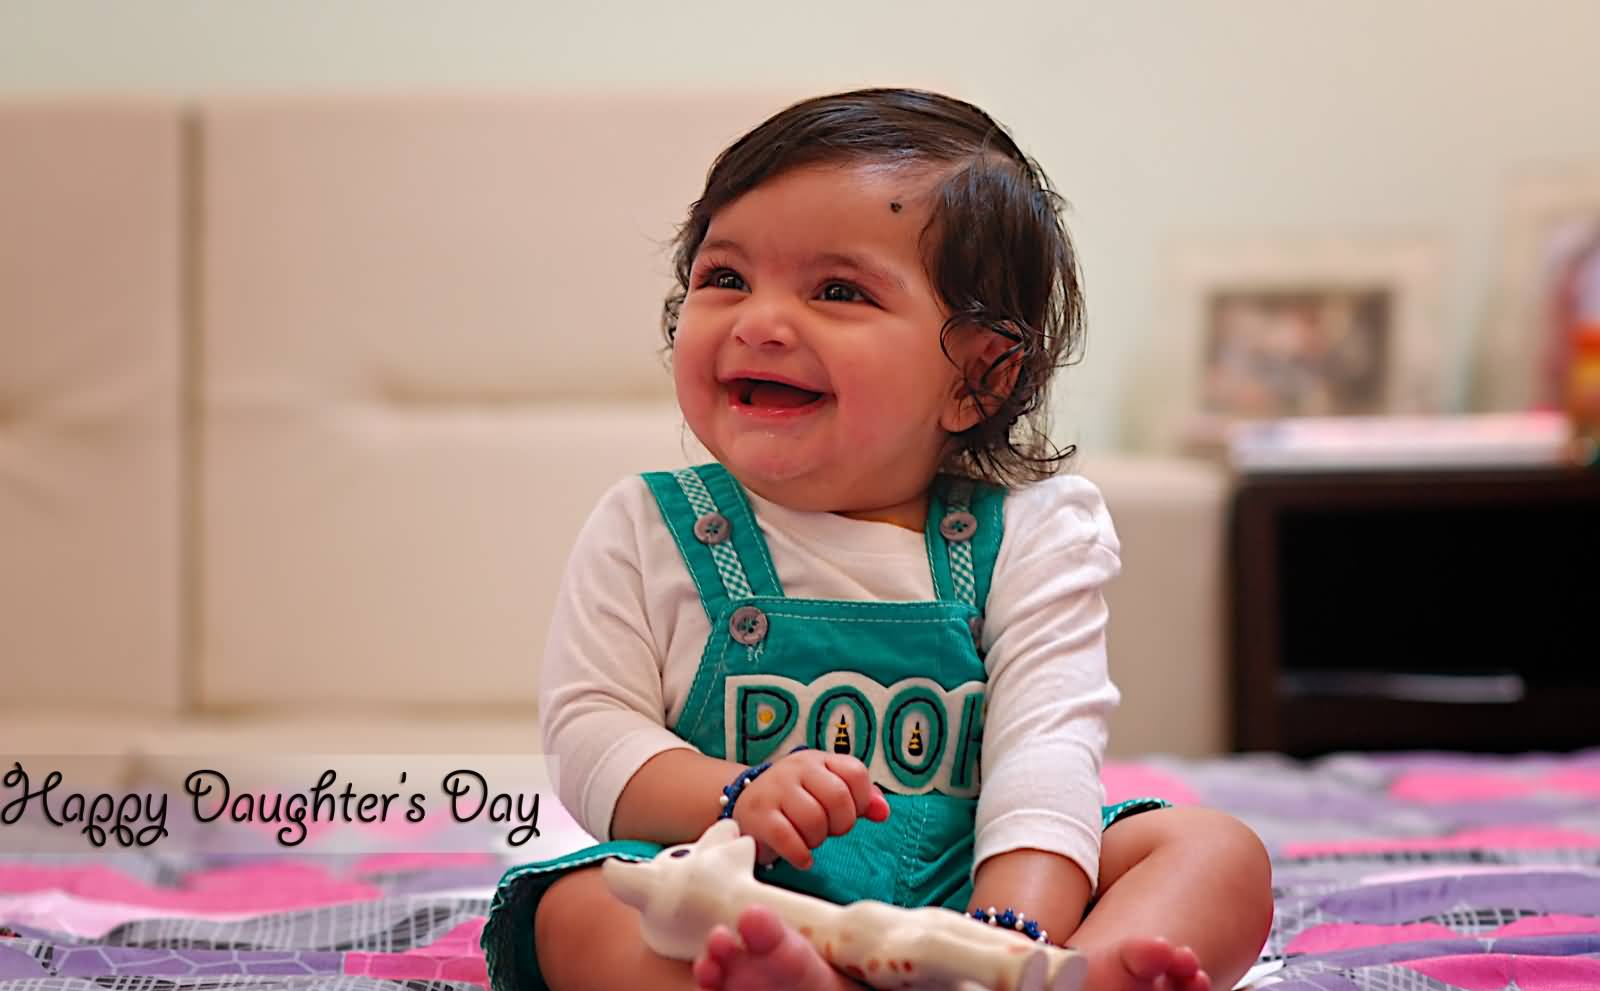 Happy Daughters Day Cute Little Daughter Image